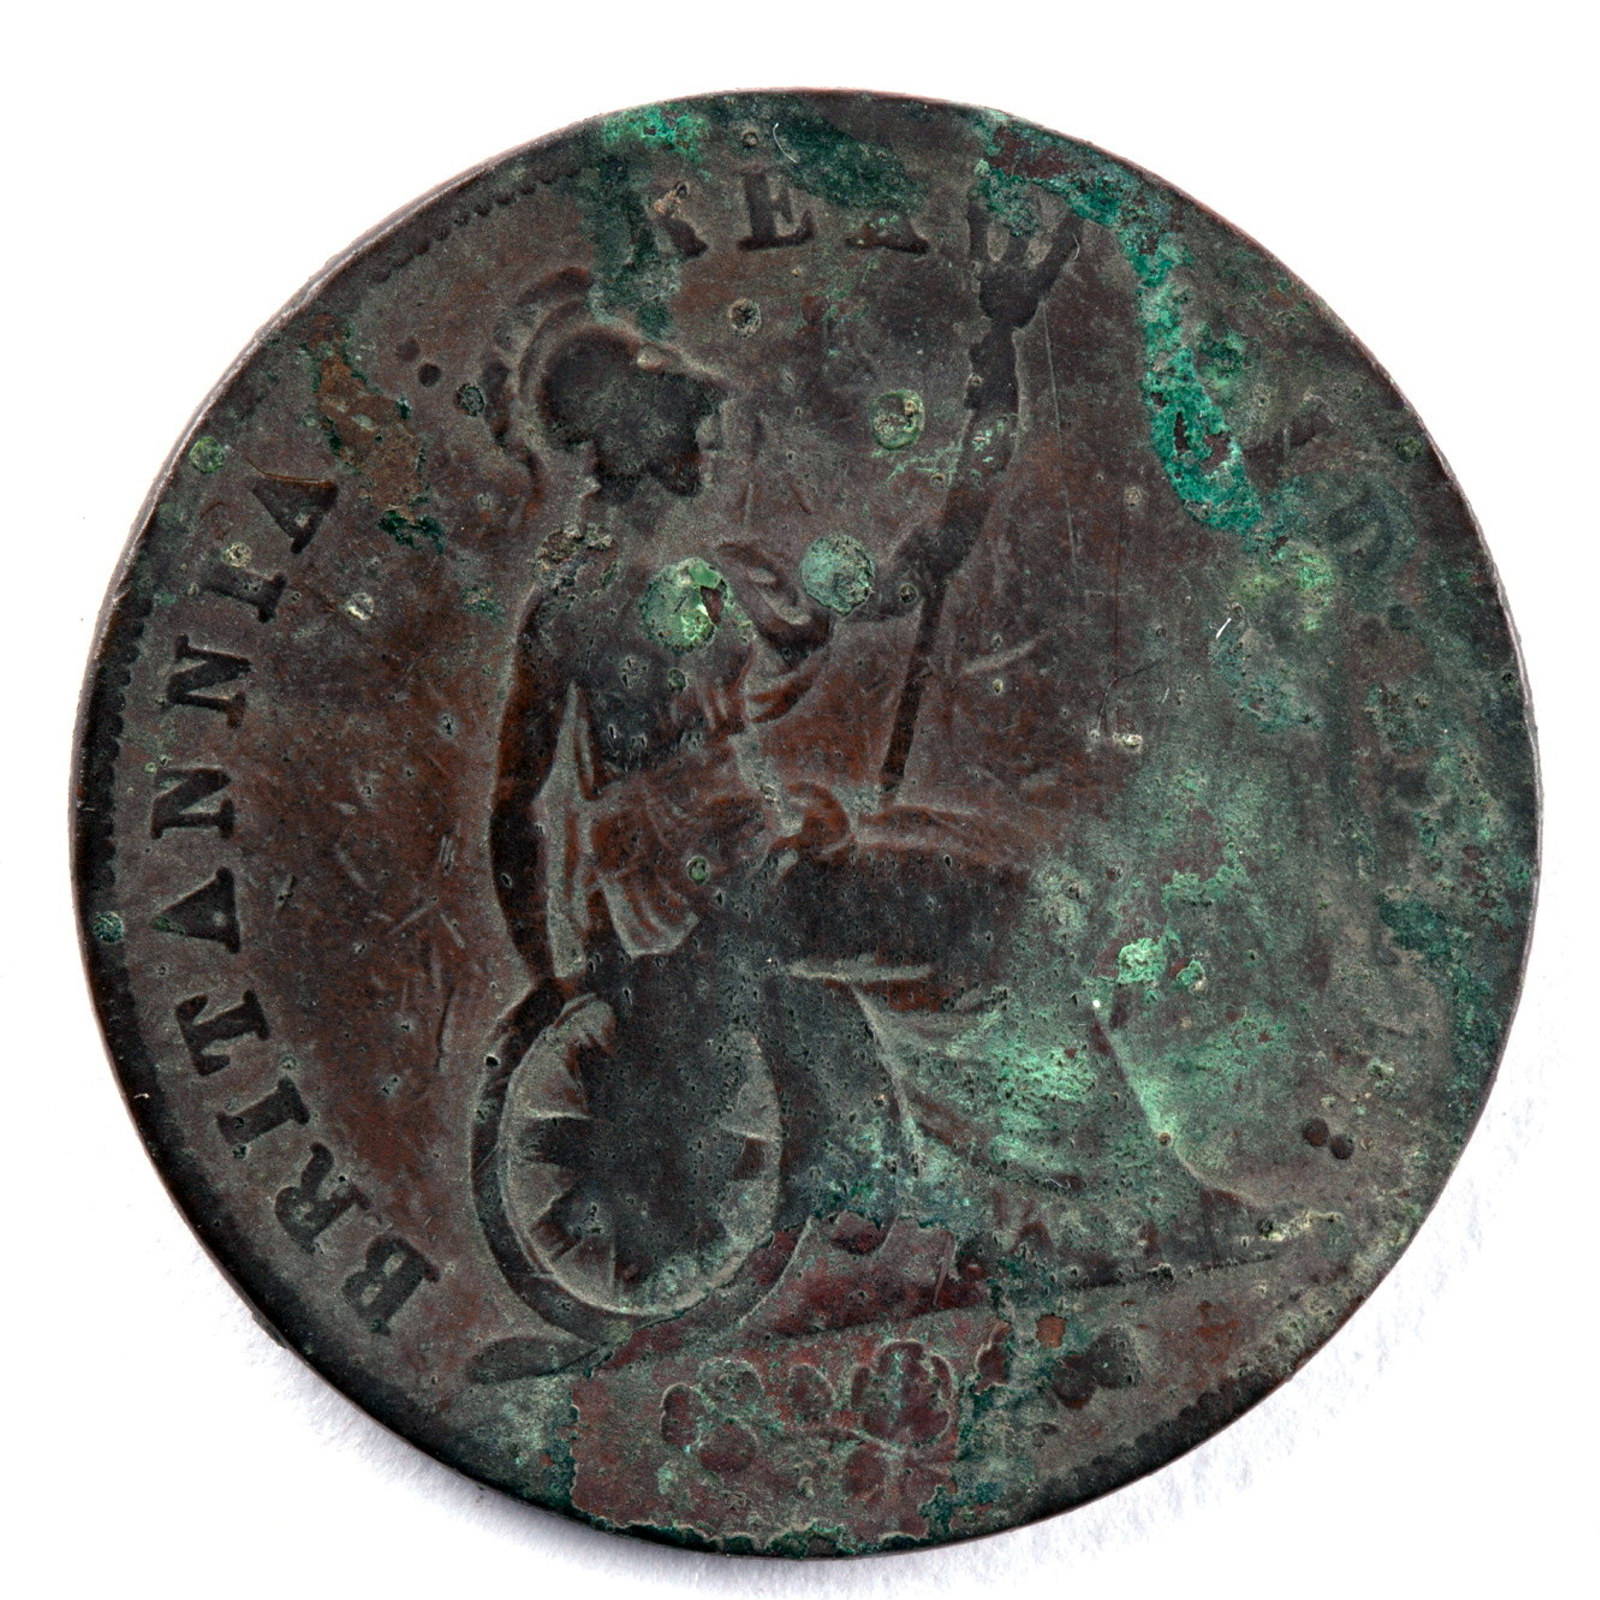 Half penny, 1827, excavated from beneath the floorboards of Hyde Park Barracks